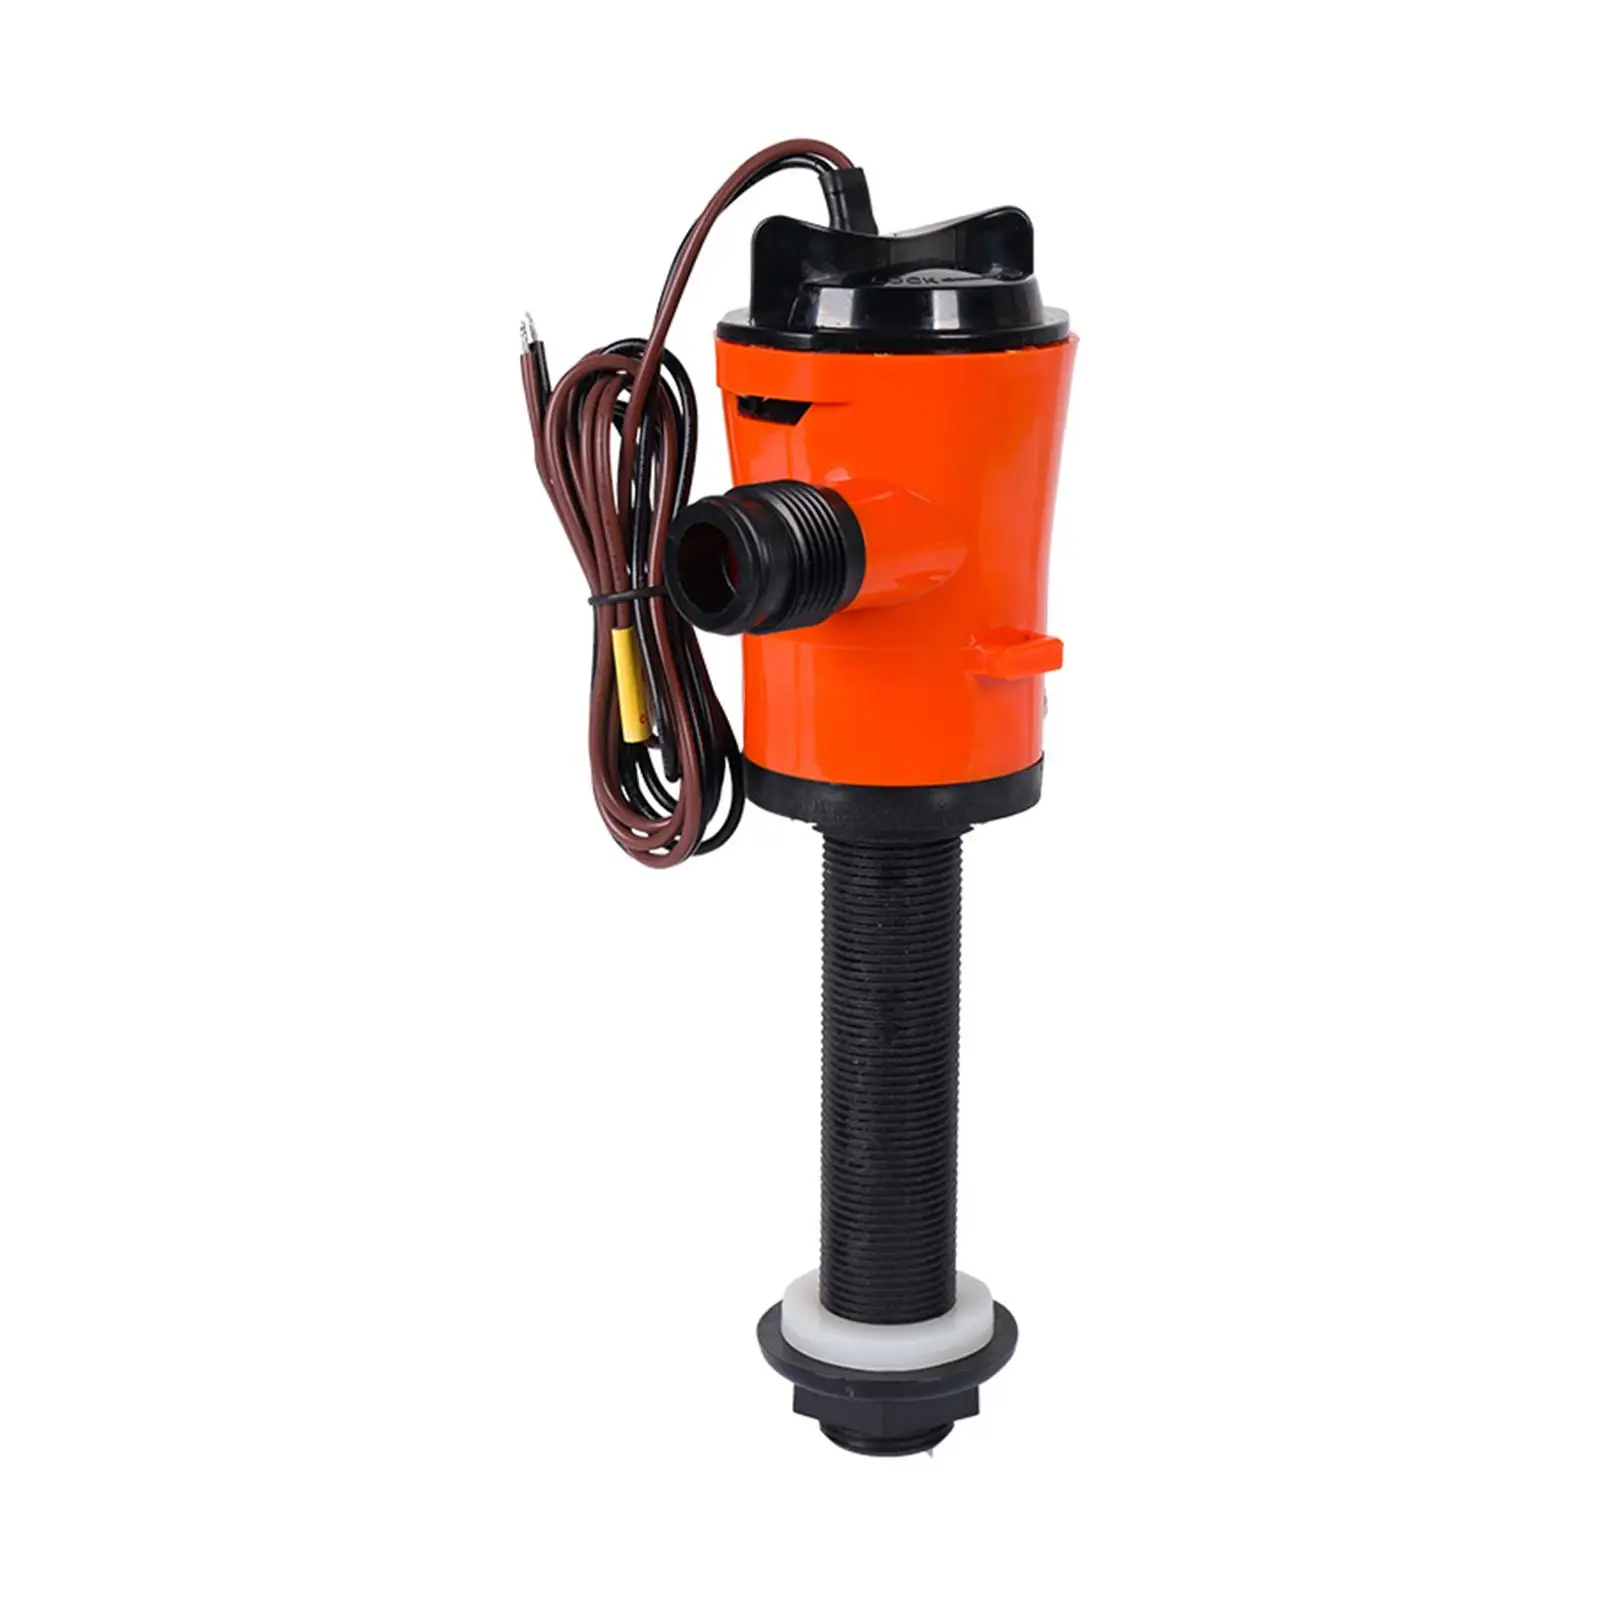 Livewell Pump for Boat Easy to Clean with Filter Easy to Install Professional Removable Spare Parts Replaces Boat Bilge Pump